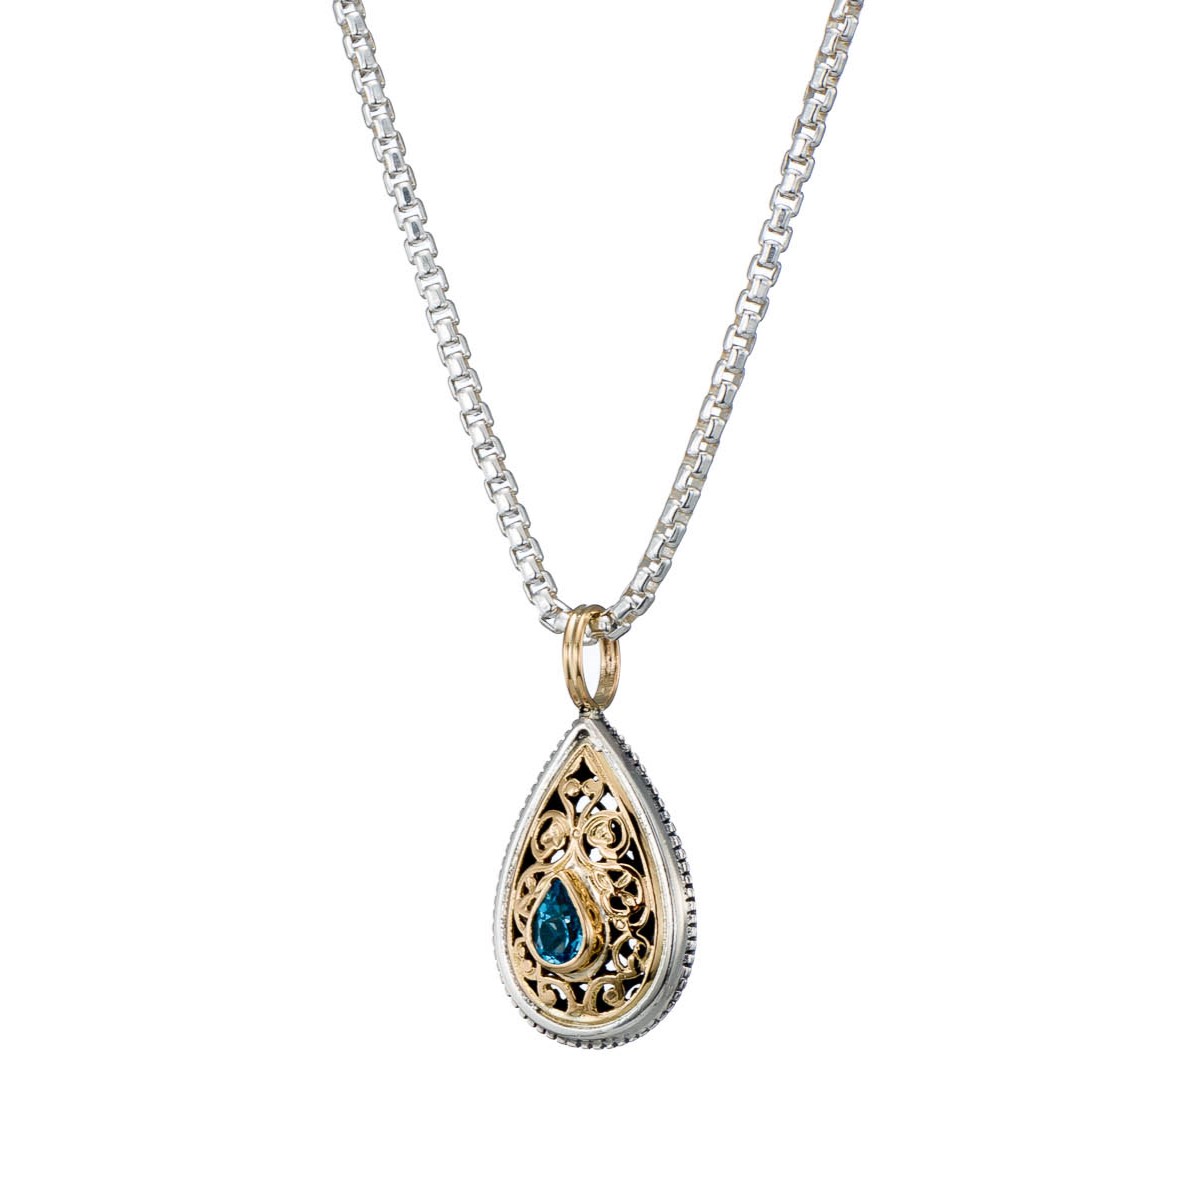 Garden Shadows drop Pendant in 18K Gold and Sterling Silver with blue Topaz